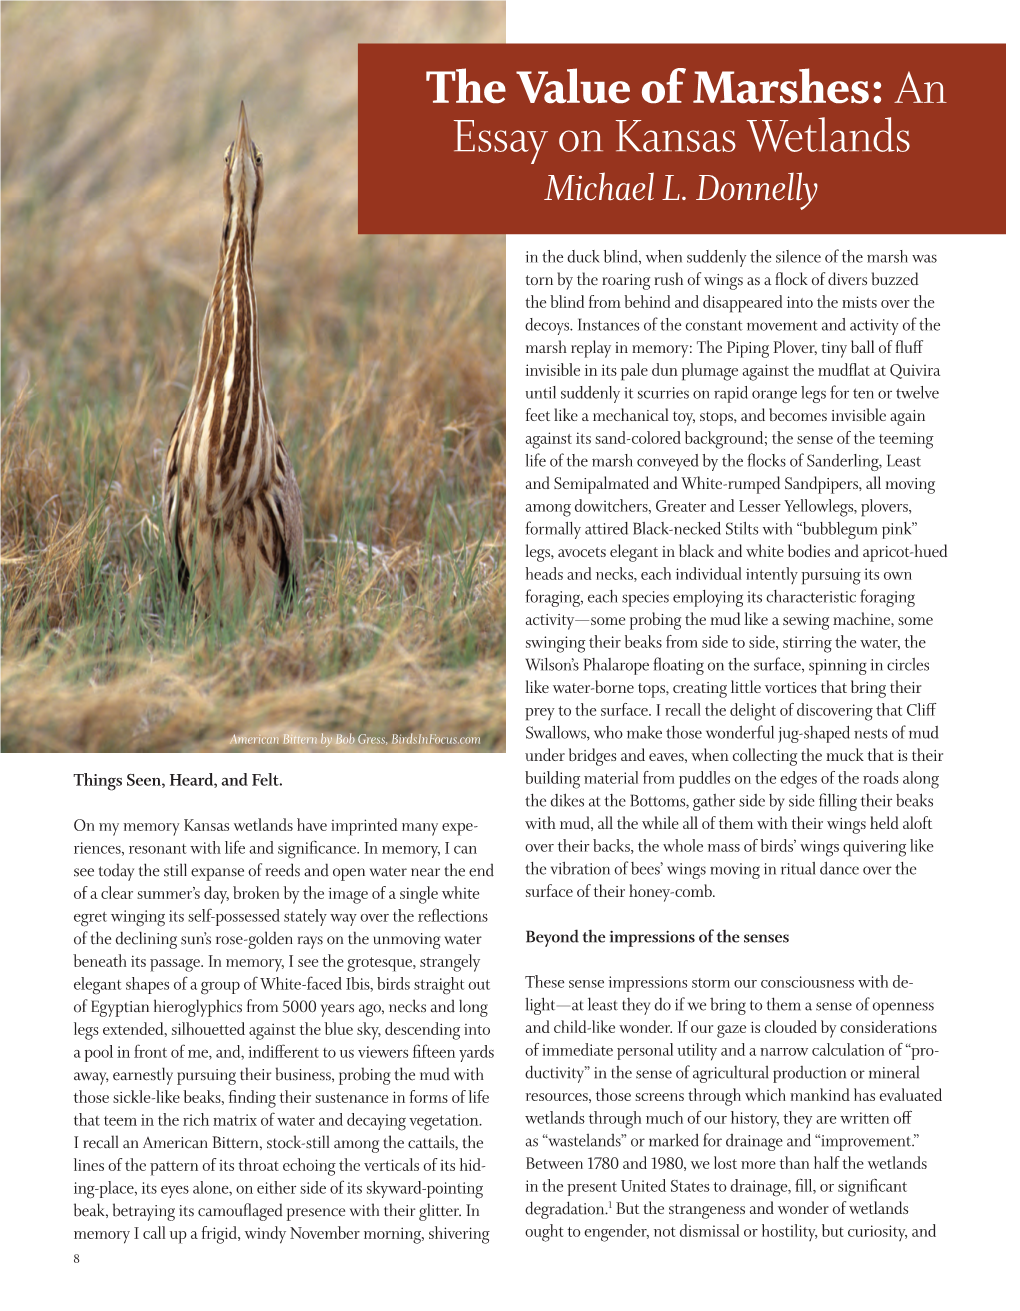 The Value of Marshes: an Essay on Kansas Wetlands Michael L